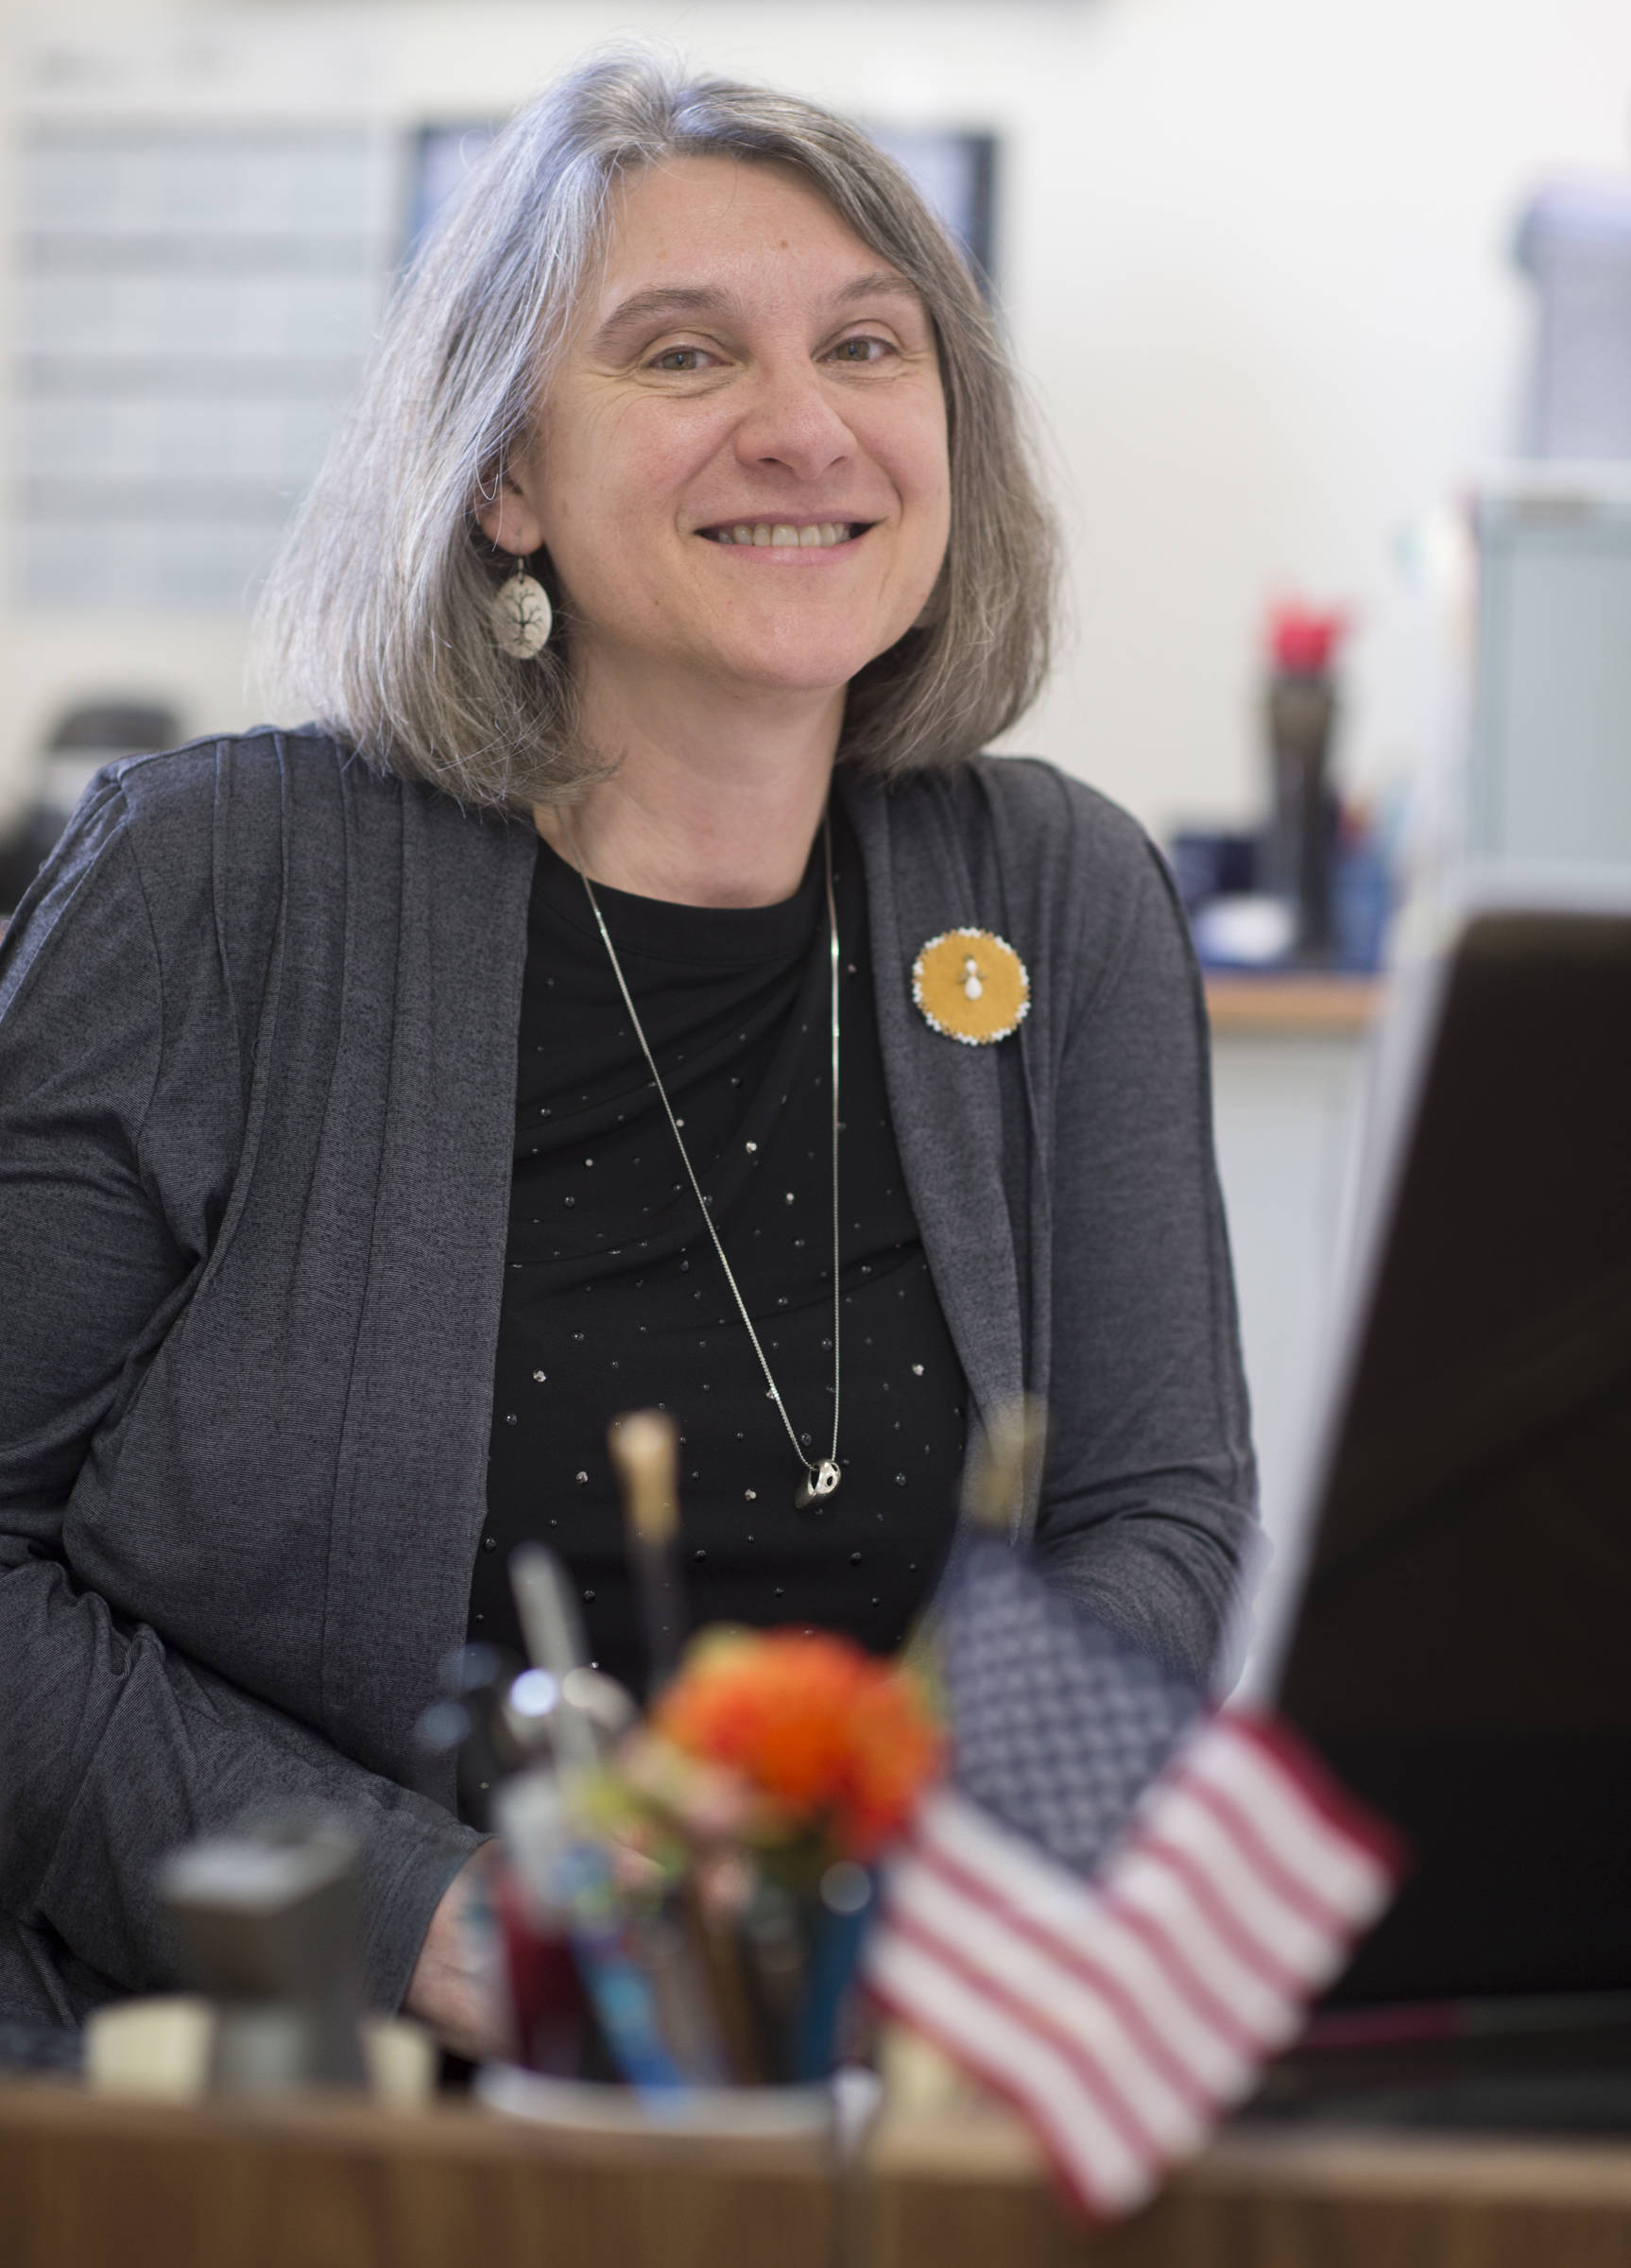 Juneau Municipal Clerk Laurie Sica in her office on Tuesday, June 19, 2018. Sica is retiring this month. (Michael Penn | Juneau Empire)